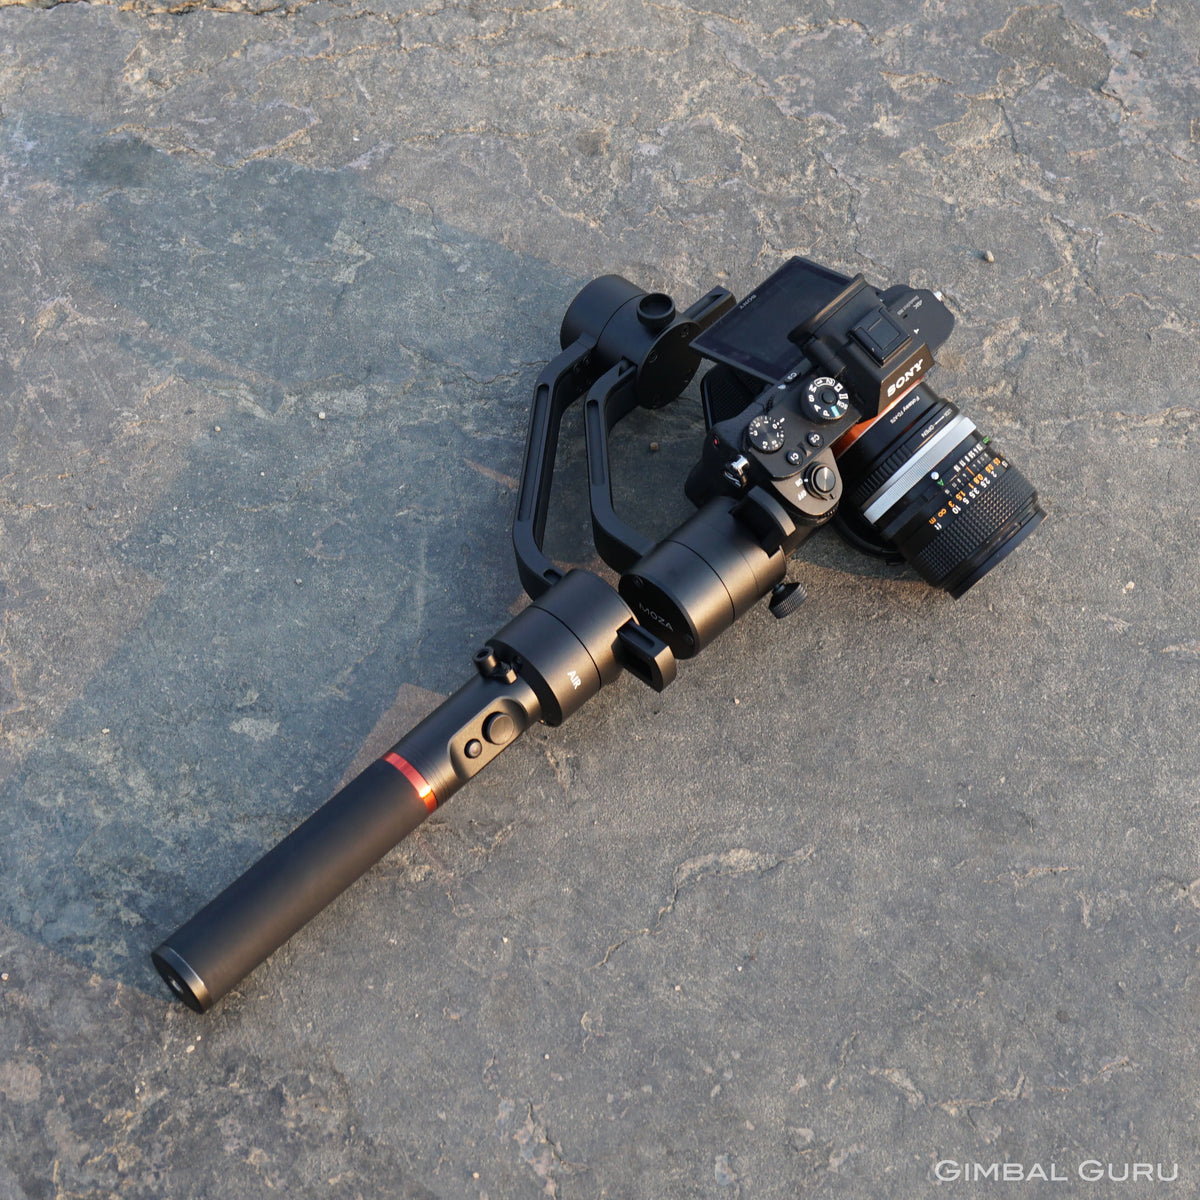 MOZA Air Camera Stabilizer and Sony A7Sii are an unbeatable duo